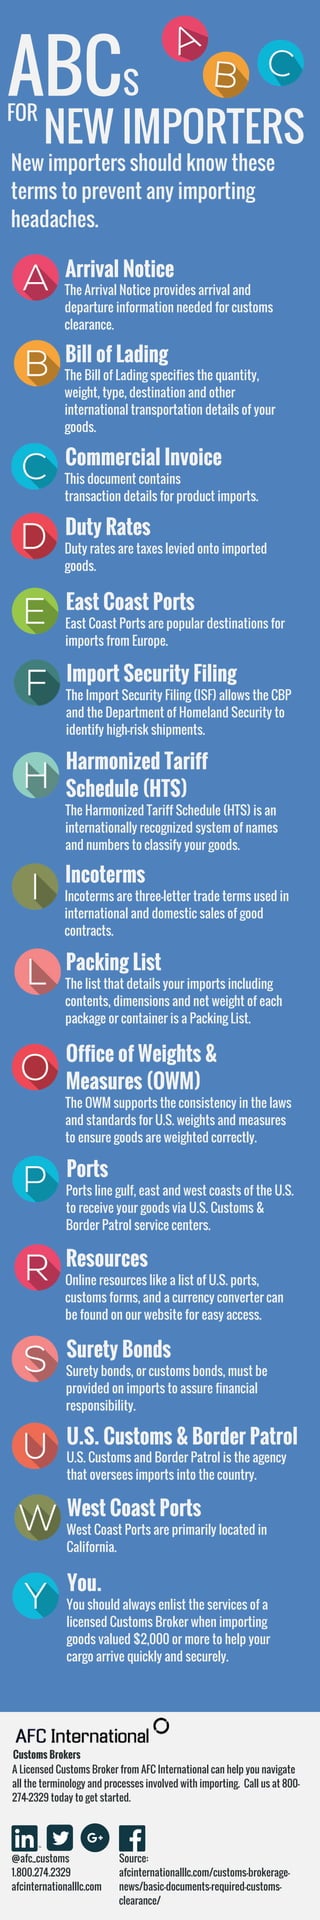 NEW IMPORTERS
ABC
New importers should know these
terms to prevent any importing
headaches.
Customs Brokers
A Licensed Customs Broker from AFC International can help you navigate
all the terminology and processes involved with importing.  Call us at 800-
274-2329 today to get started. 
@afc_customs
1.800.274.2329
afcinternationalllc.com
Source:
afcinternationalllc.com/customs-brokerage-
news/basic-documents-required-customs-
clearance/
The Arrival Notice provides arrival and
departure information needed for customs
clearance.
Arrival Notice 
S
FOR
The Bill of Lading specifies the quantity,
weight, type, destination and other
international transportation details of your
goods.
Bill of Lading
This document contains
transaction details for product imports.
Commercial Invoice
Duty rates are taxes levied onto imported
goods. 
Duty Rates
East Coast Ports are popular destinations for
imports from Europe.
East Coast Ports
The Import Security Filing (ISF) allows the CBP
and the Department of Homeland Security to
identify high-risk shipments.
Import Security Filing
The Harmonized Tariff Schedule (HTS) is an
internationally recognized system of names
and numbers to classify your goods.
Harmonized Tariff
Schedule (HTS)
Incoterms are three-letter trade terms used in
international and domestic sales of good
contracts.
Incoterms
The list that details your imports including
contents, dimensions and net weight of each
package or container is a Packing List.
Packing List
Ports line gulf, east and west coasts of the U.S.
to receive your goods via U.S. Customs &
Border Patrol service centers.
Ports
Surety bonds, or customs bonds, must be
provided on imports to assure financial
responsibility.
Surety Bonds
U.S. Customs and Border Patrol is the agency
that oversees imports into the country.
U.S. Customs & Border Patrol
West Coast Ports are primarily located in
California.
West Coast Ports
You should always enlist the services of a
licensed Customs Broker when importing
goods valued $2,000 or more to help your
cargo arrive quickly and securely.  
You.
Online resources like a list of U.S. ports,
customs forms, and a currency converter can
be found on our website for easy access.
Resources
The OWM supports the consistency in the laws
and standards for U.S. weights and measures
to ensure goods are weighted correctly.
Office of Weights &
Measures (OWM)
 